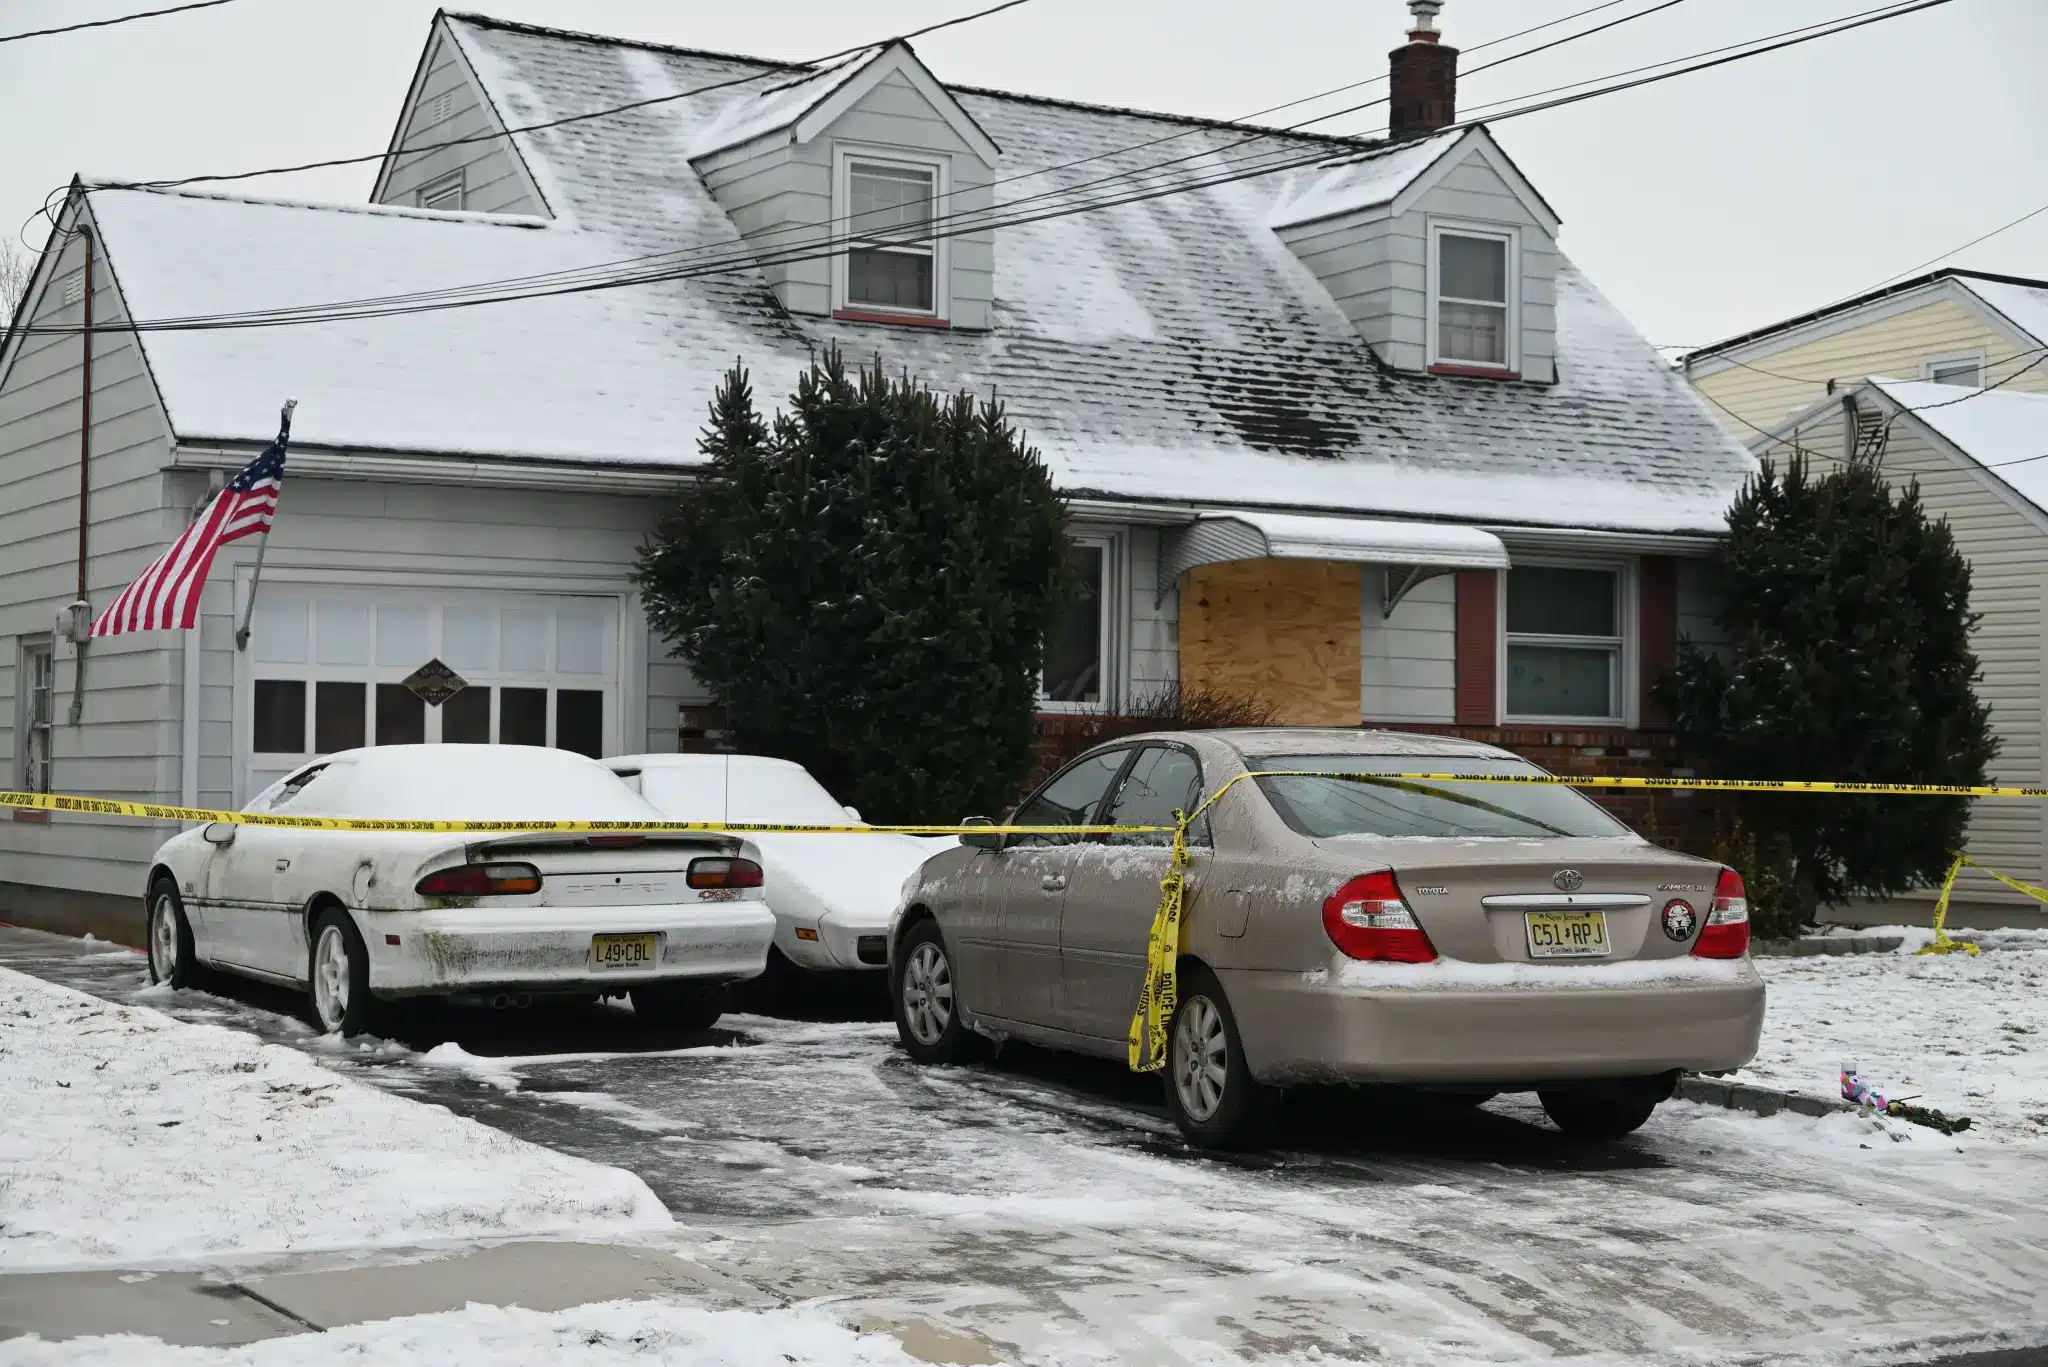 Union, NJ murder suicide: Andrea Alarcon shoots and kills husband, Ruben Alarcon and their 2 young daughters then self. 